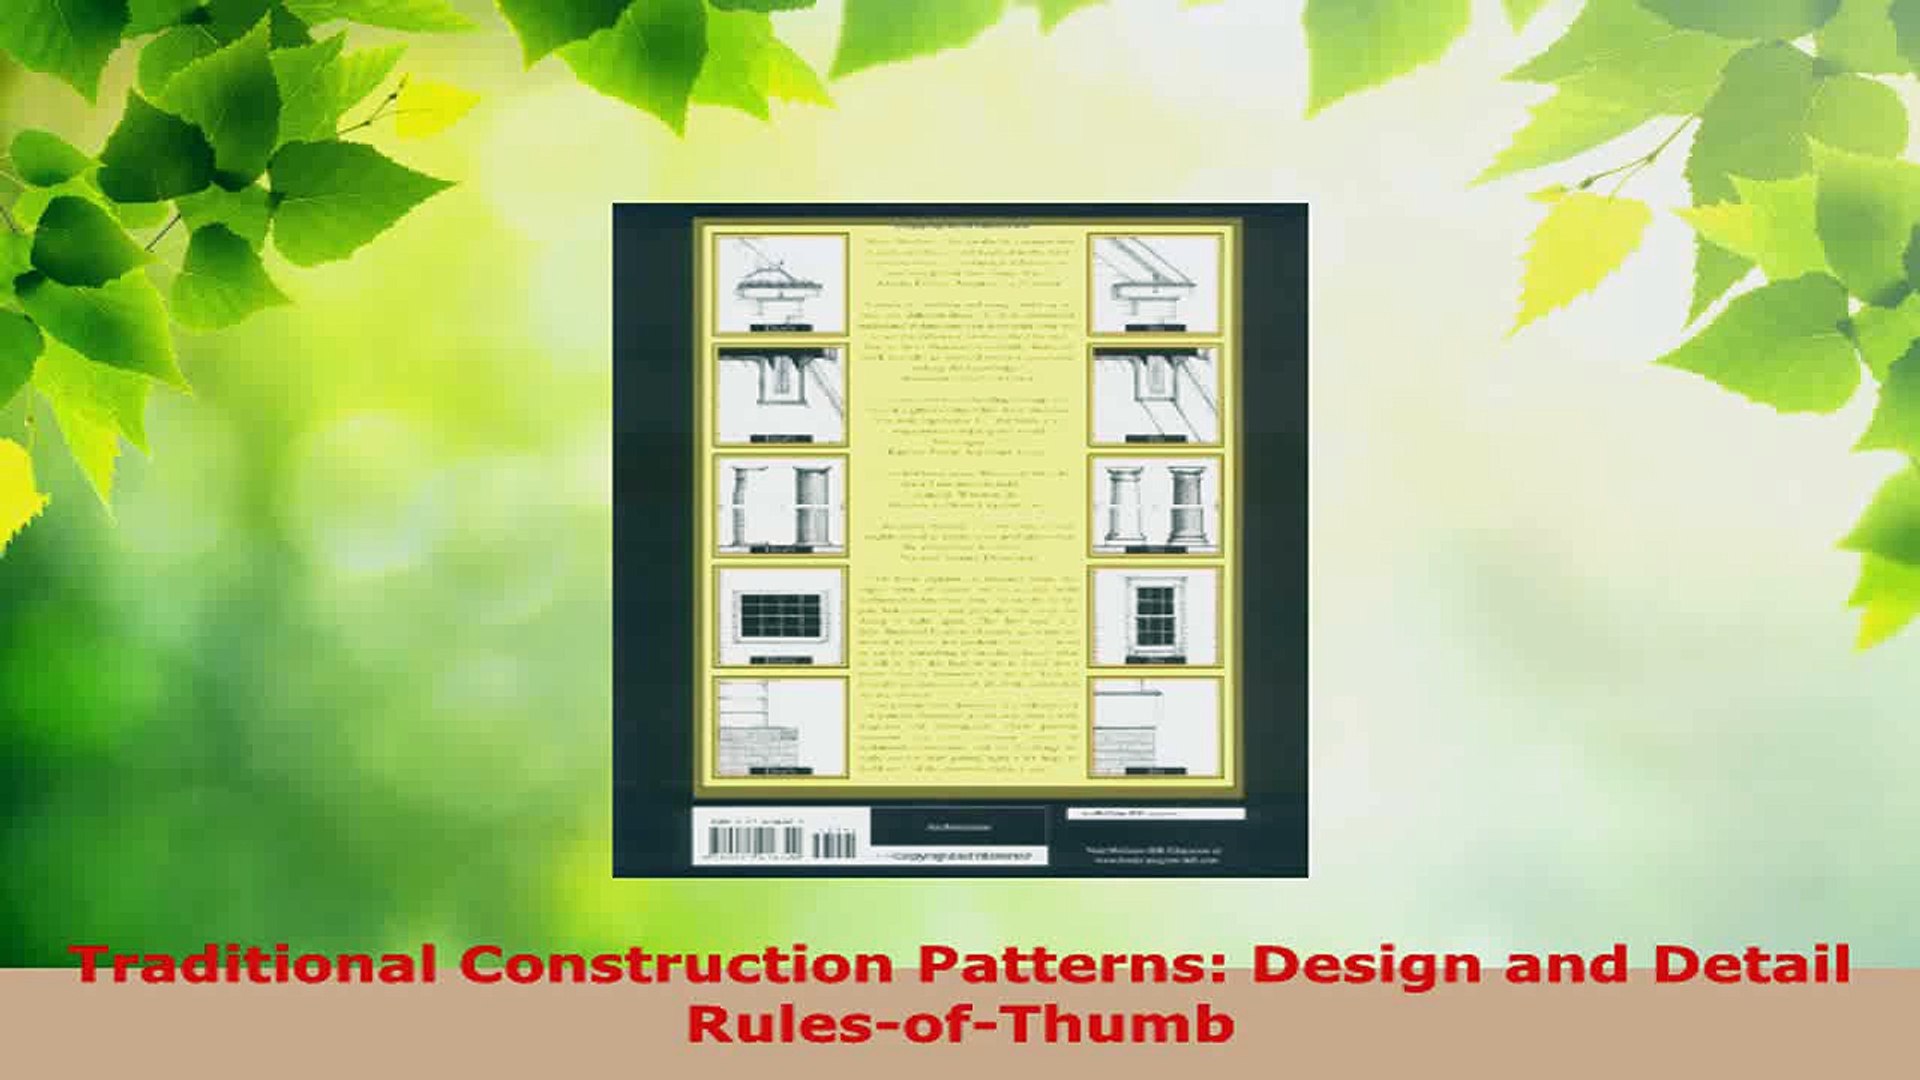 Download  Traditional Construction Patterns Design and Detail RulesofThumb PDF Free